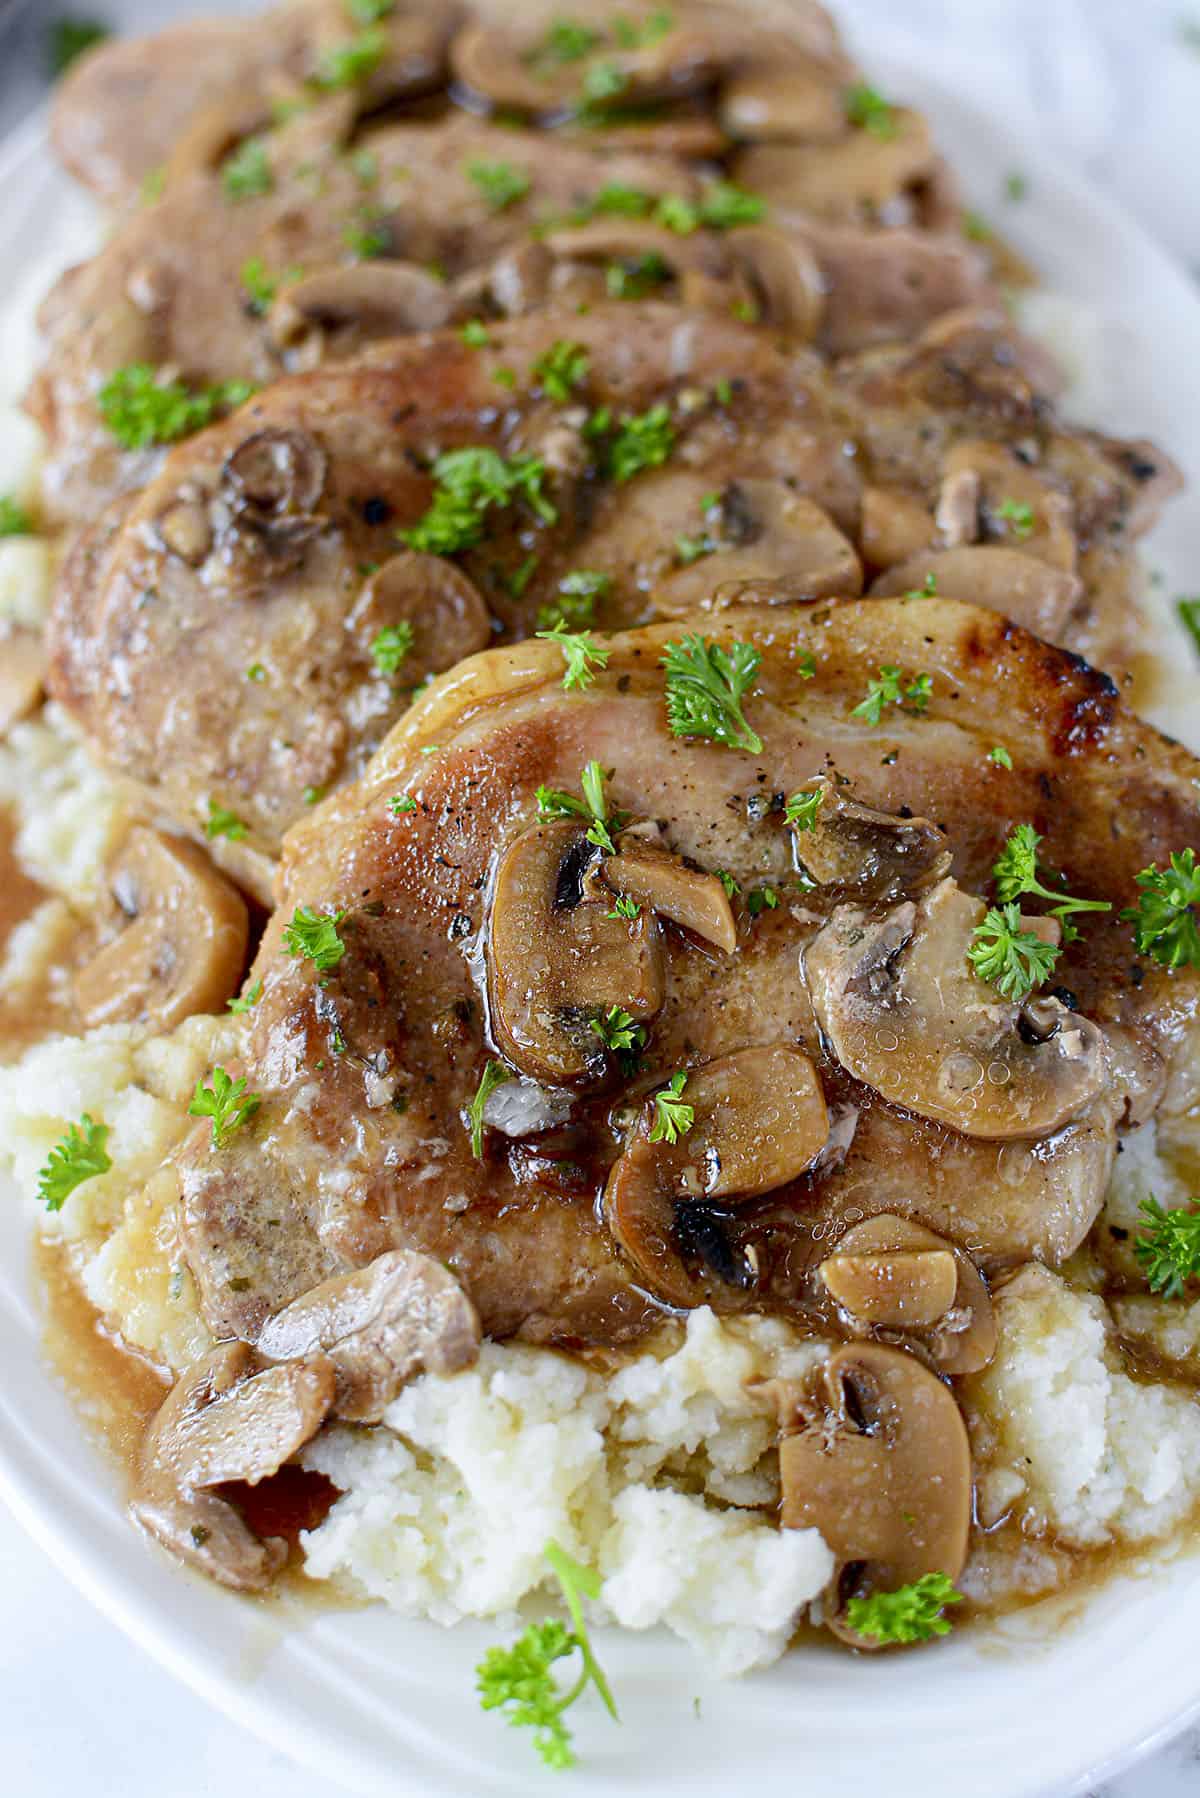 Slow cooker pork chops with gravy and mushrooms on mashed potatoes.